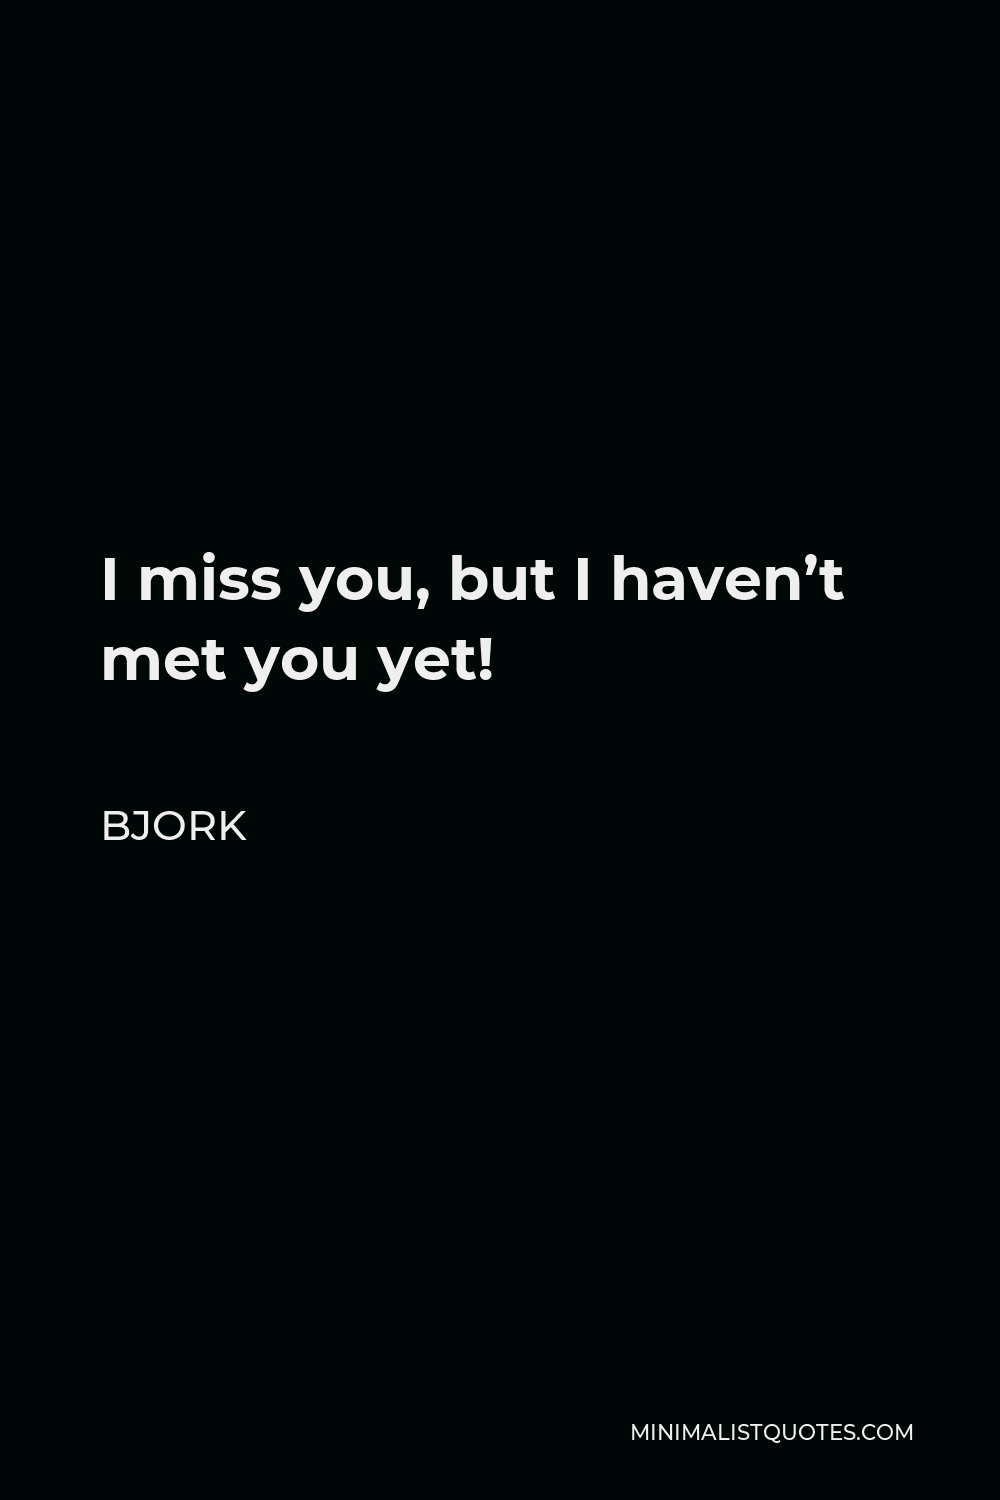 Bjork Quote - I miss you, but I haven’t met you yet!